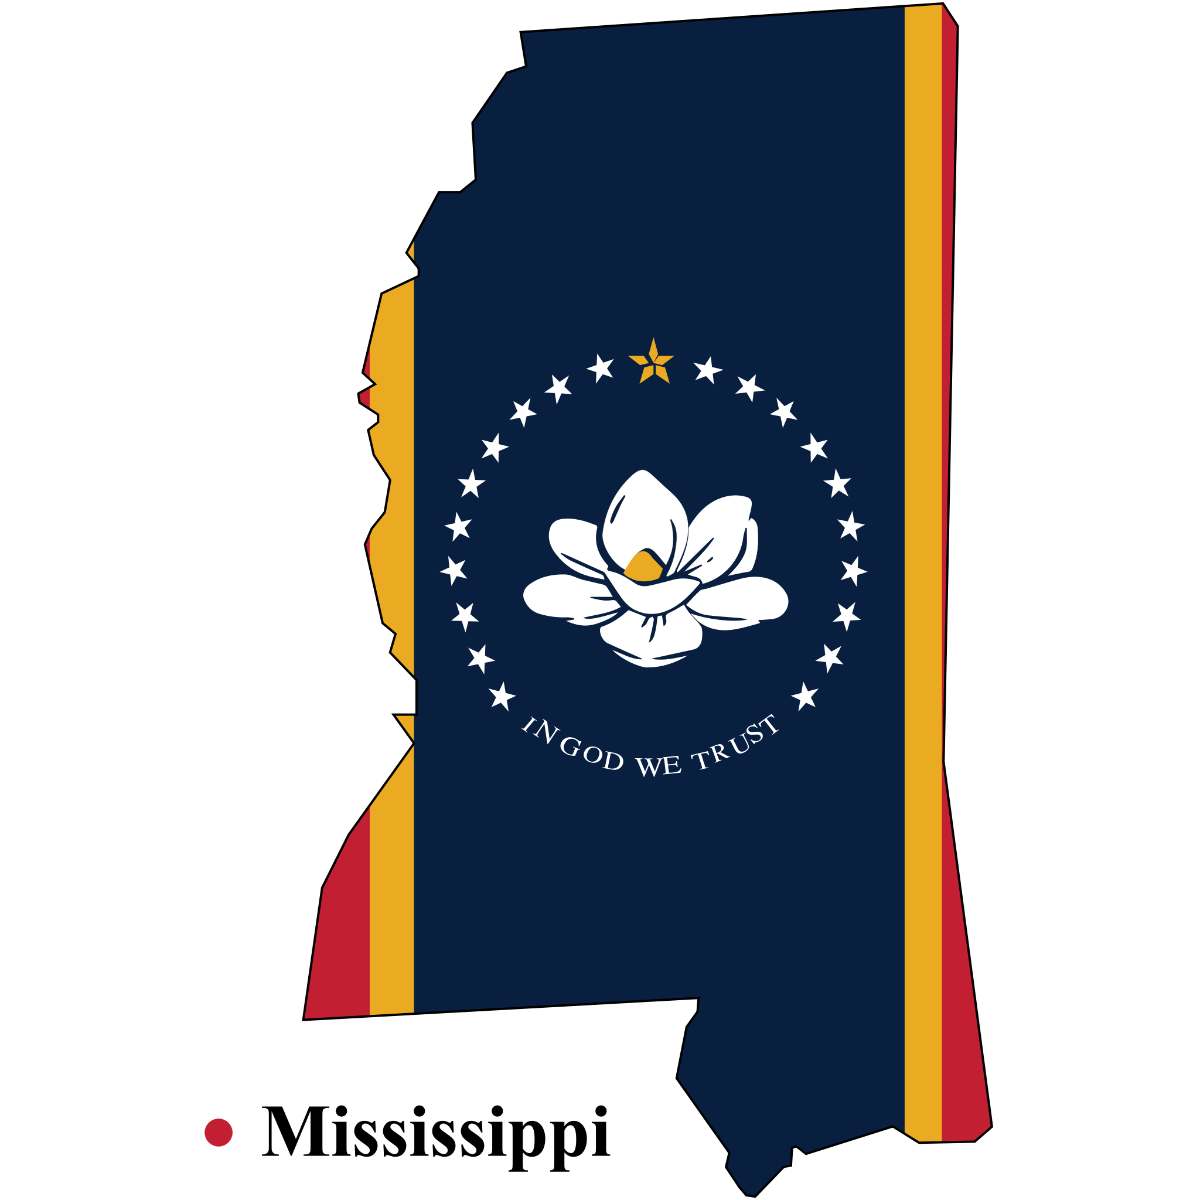 Mississippi State map cutout with Mississippi flag superimposed